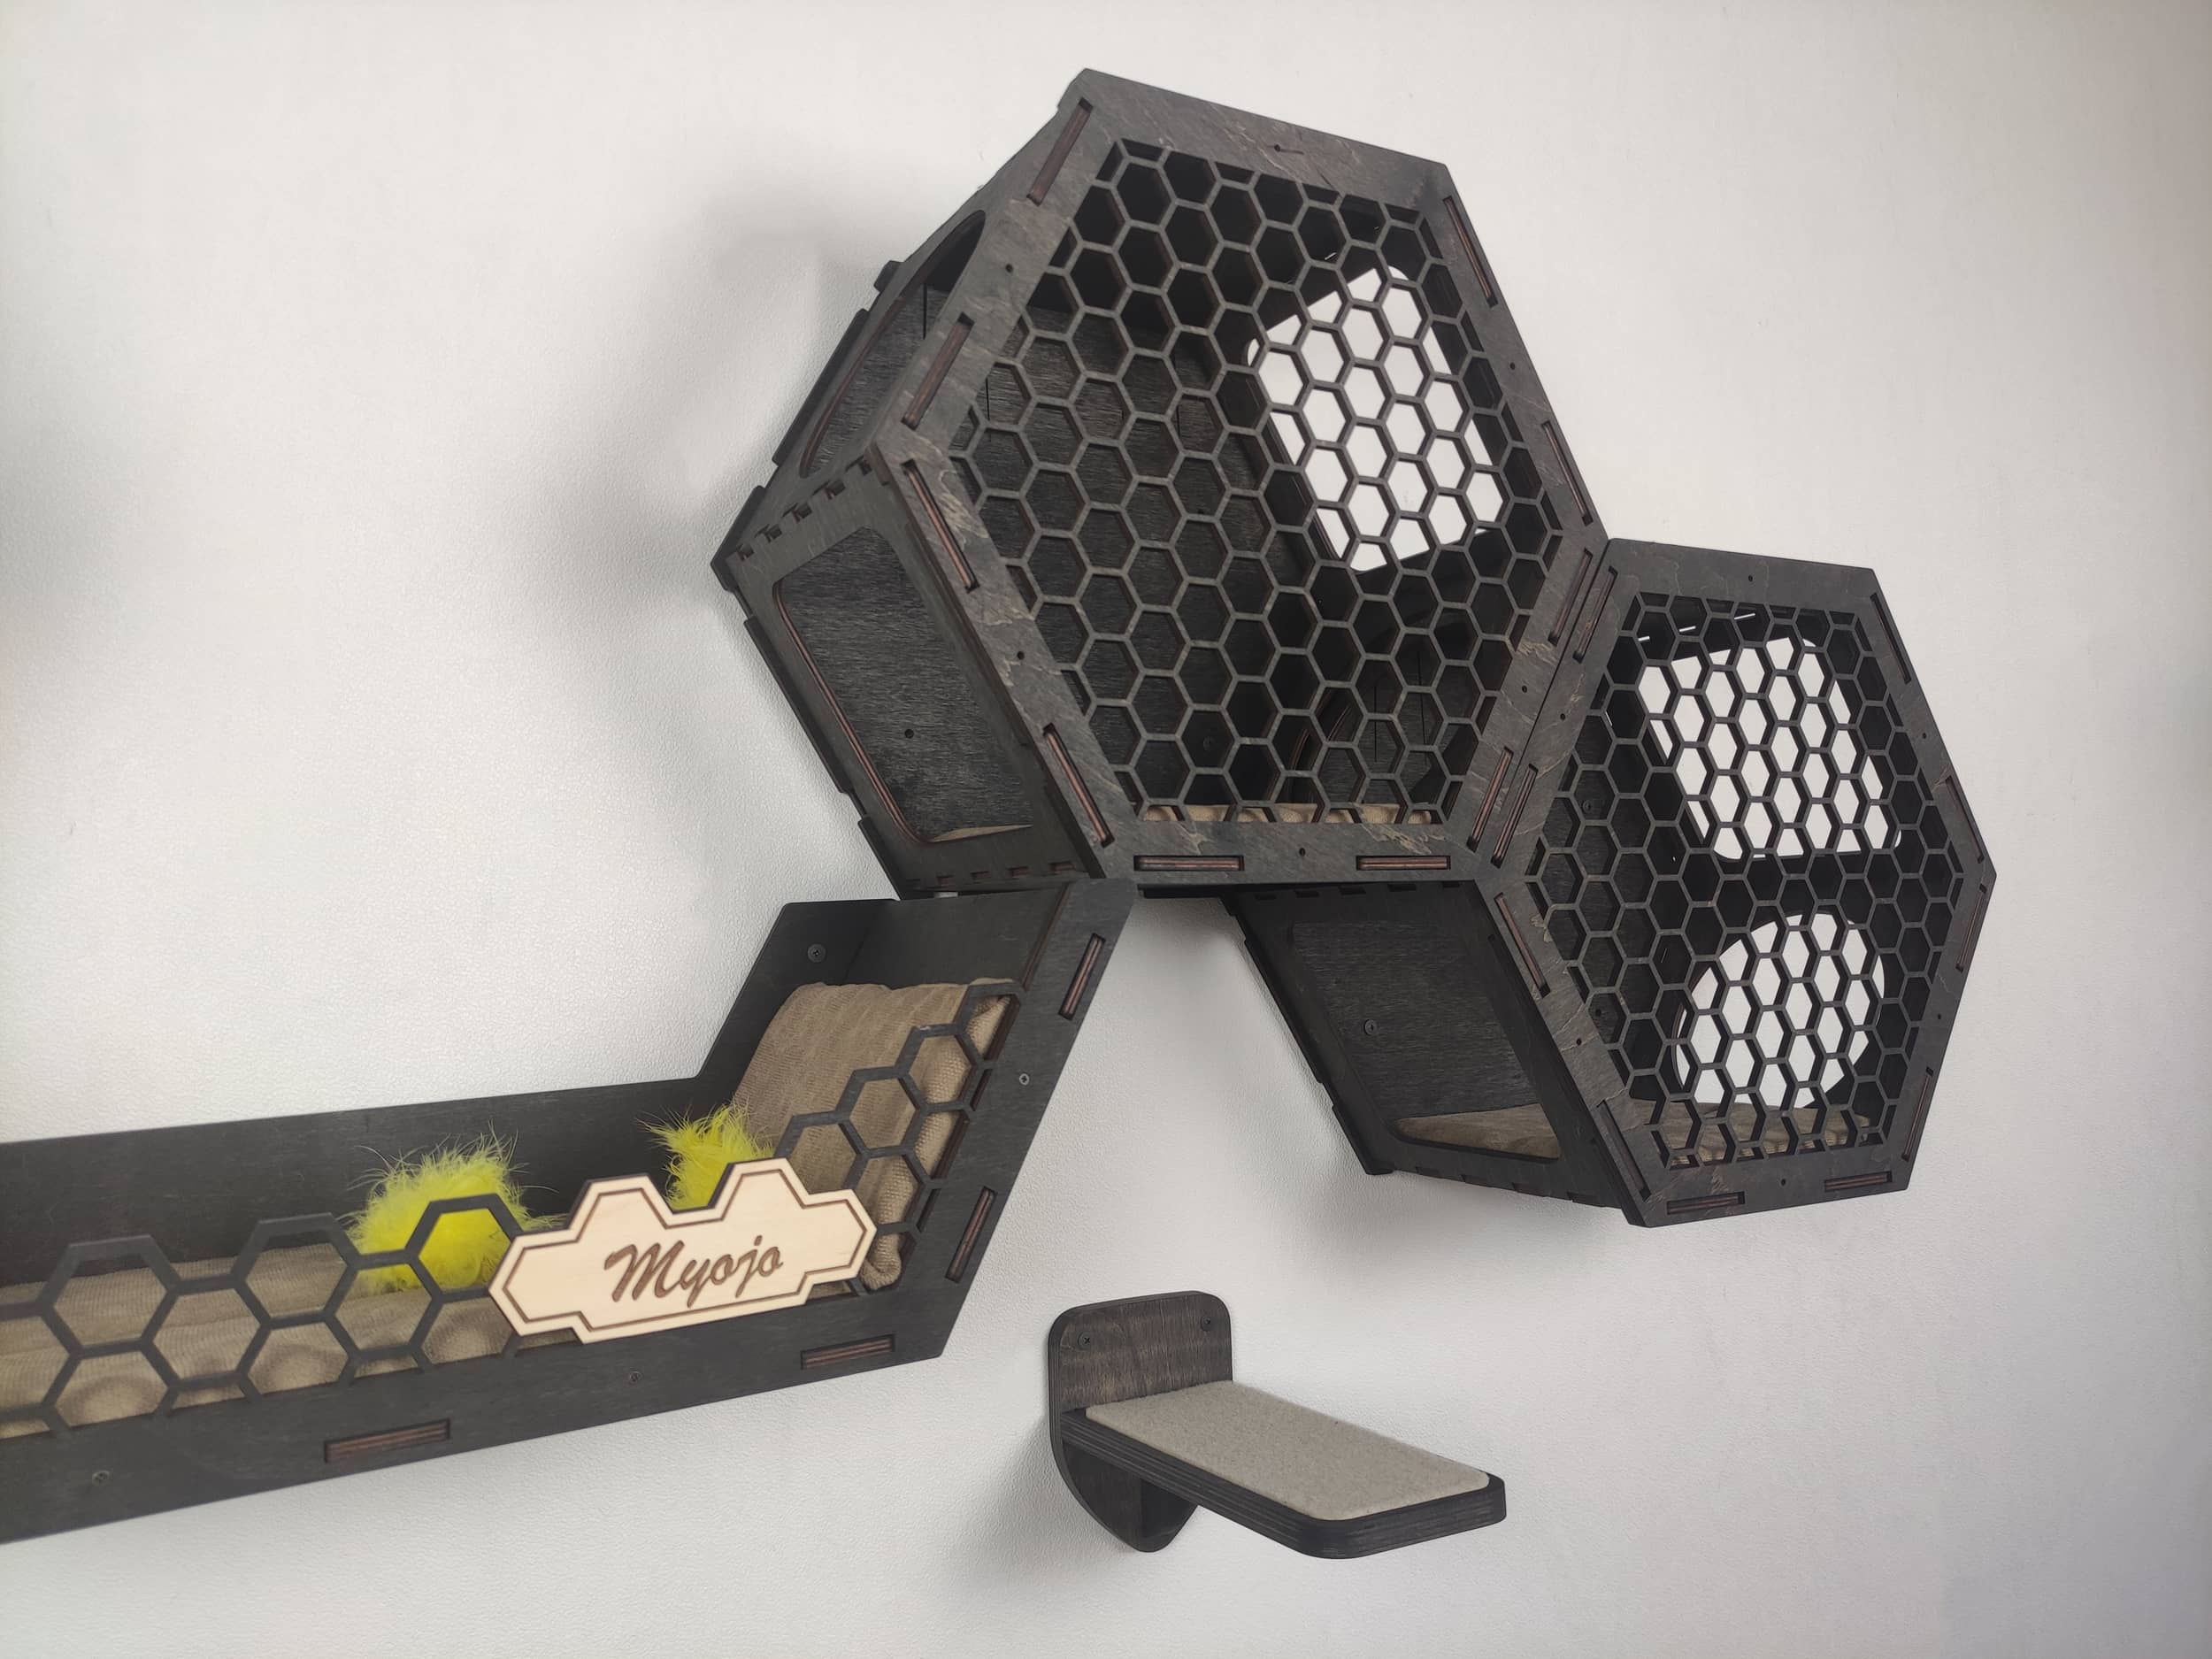 Hexagon Cat Wall Shelf with Decorative Honeycomb Front Panel